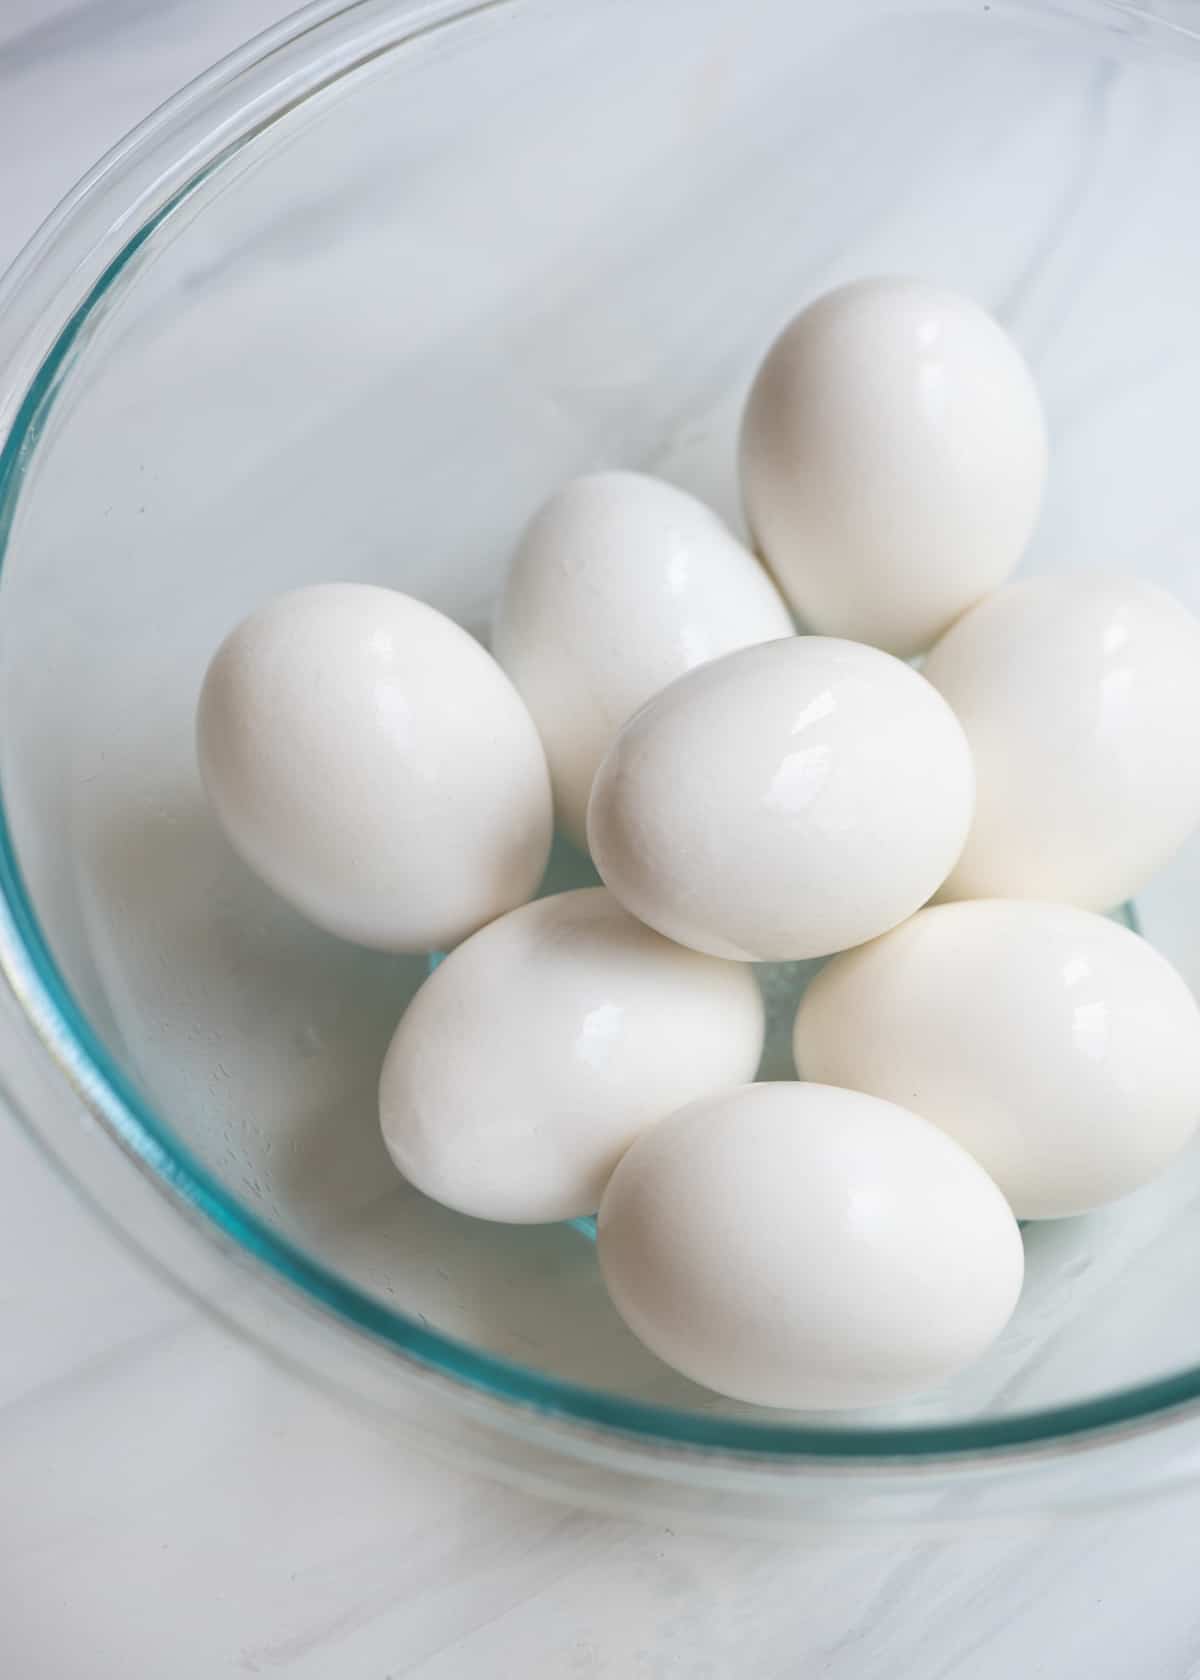 A glass bowl filled with hard boiled eggs.